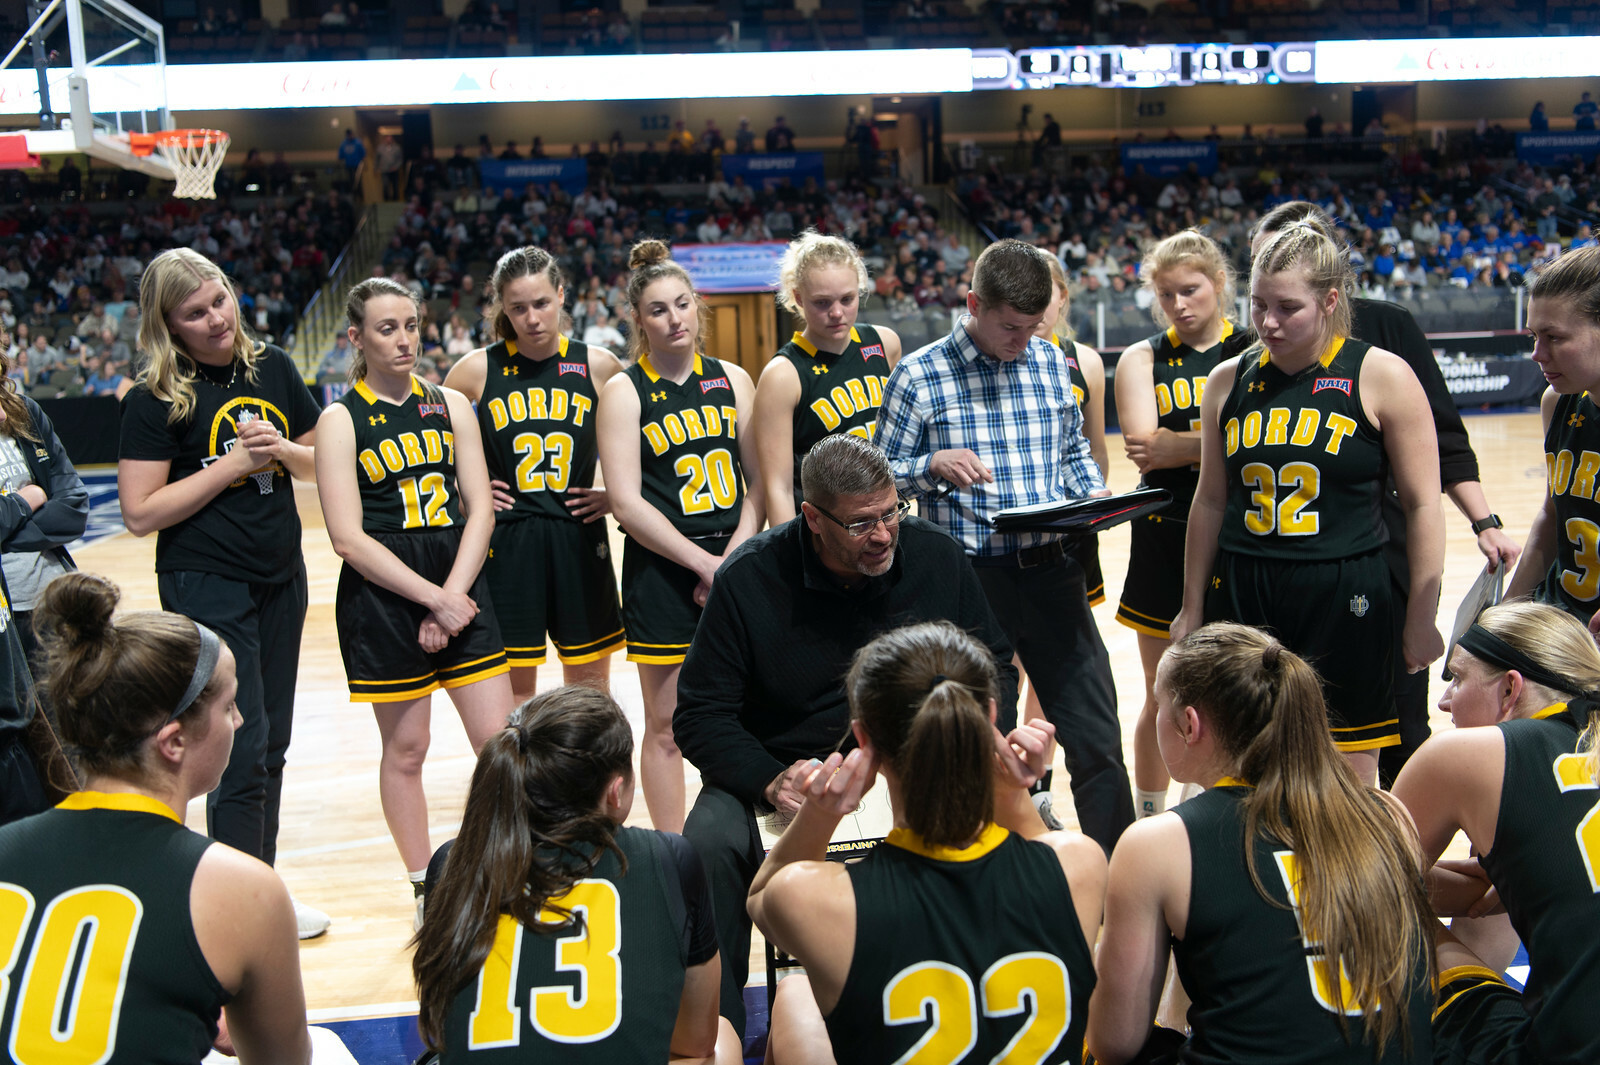 Dordt's women's basketball team during a time-out